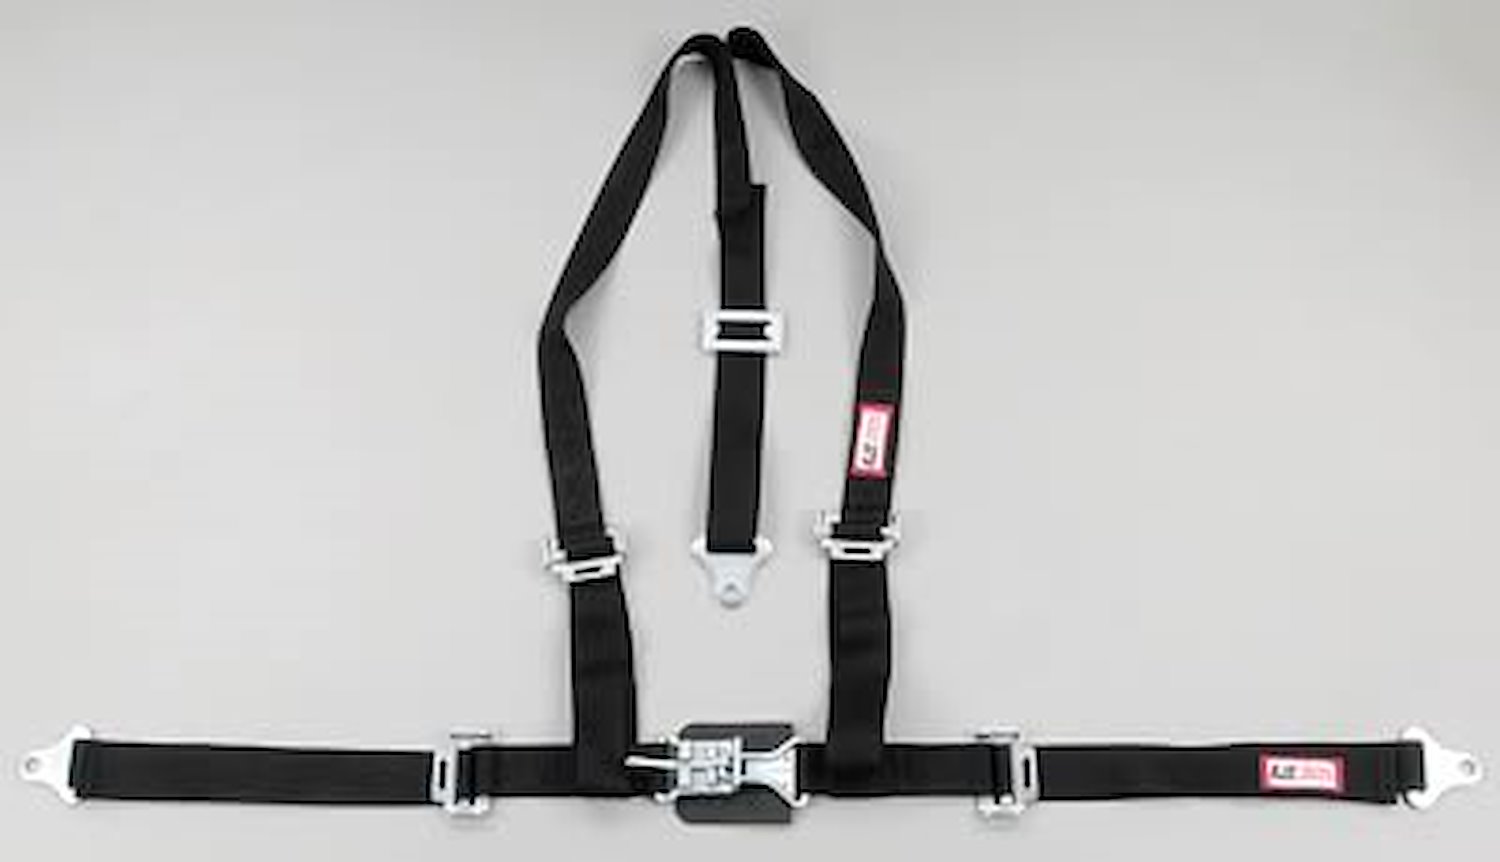 NON-SFI L&L HARNESS 3 PULL UP Lap BELT SNAP SEWN IN 2 S.H. Y FLOOR Mount WRAP/BOLT HOT PINK